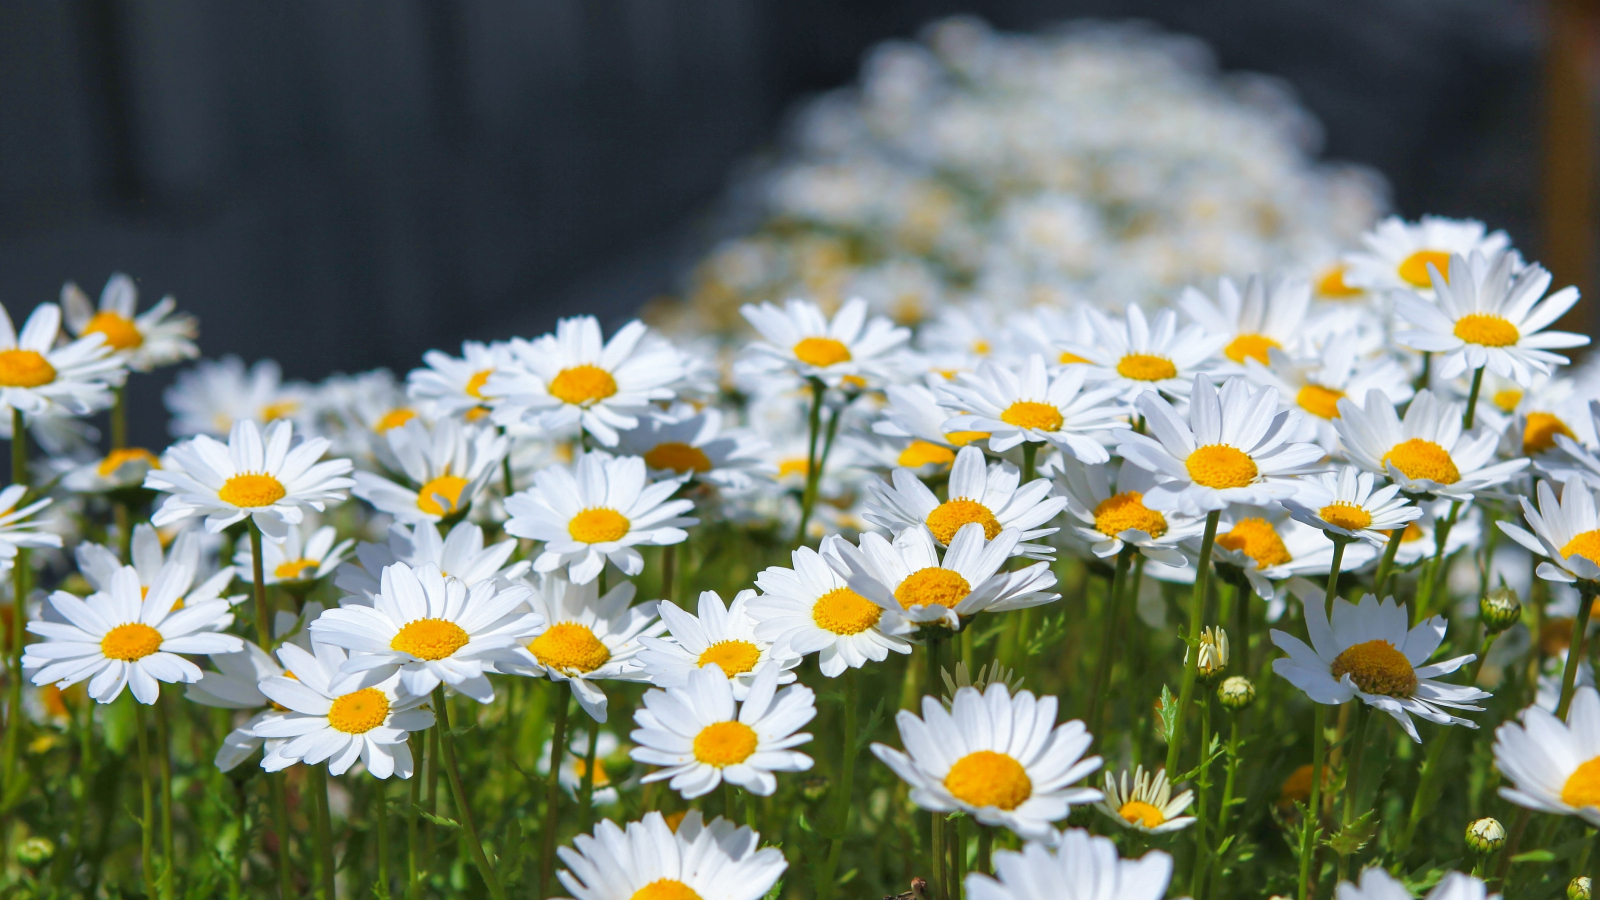 Meadow, spring, flowers, white daisy, 1600x900 wallpaper